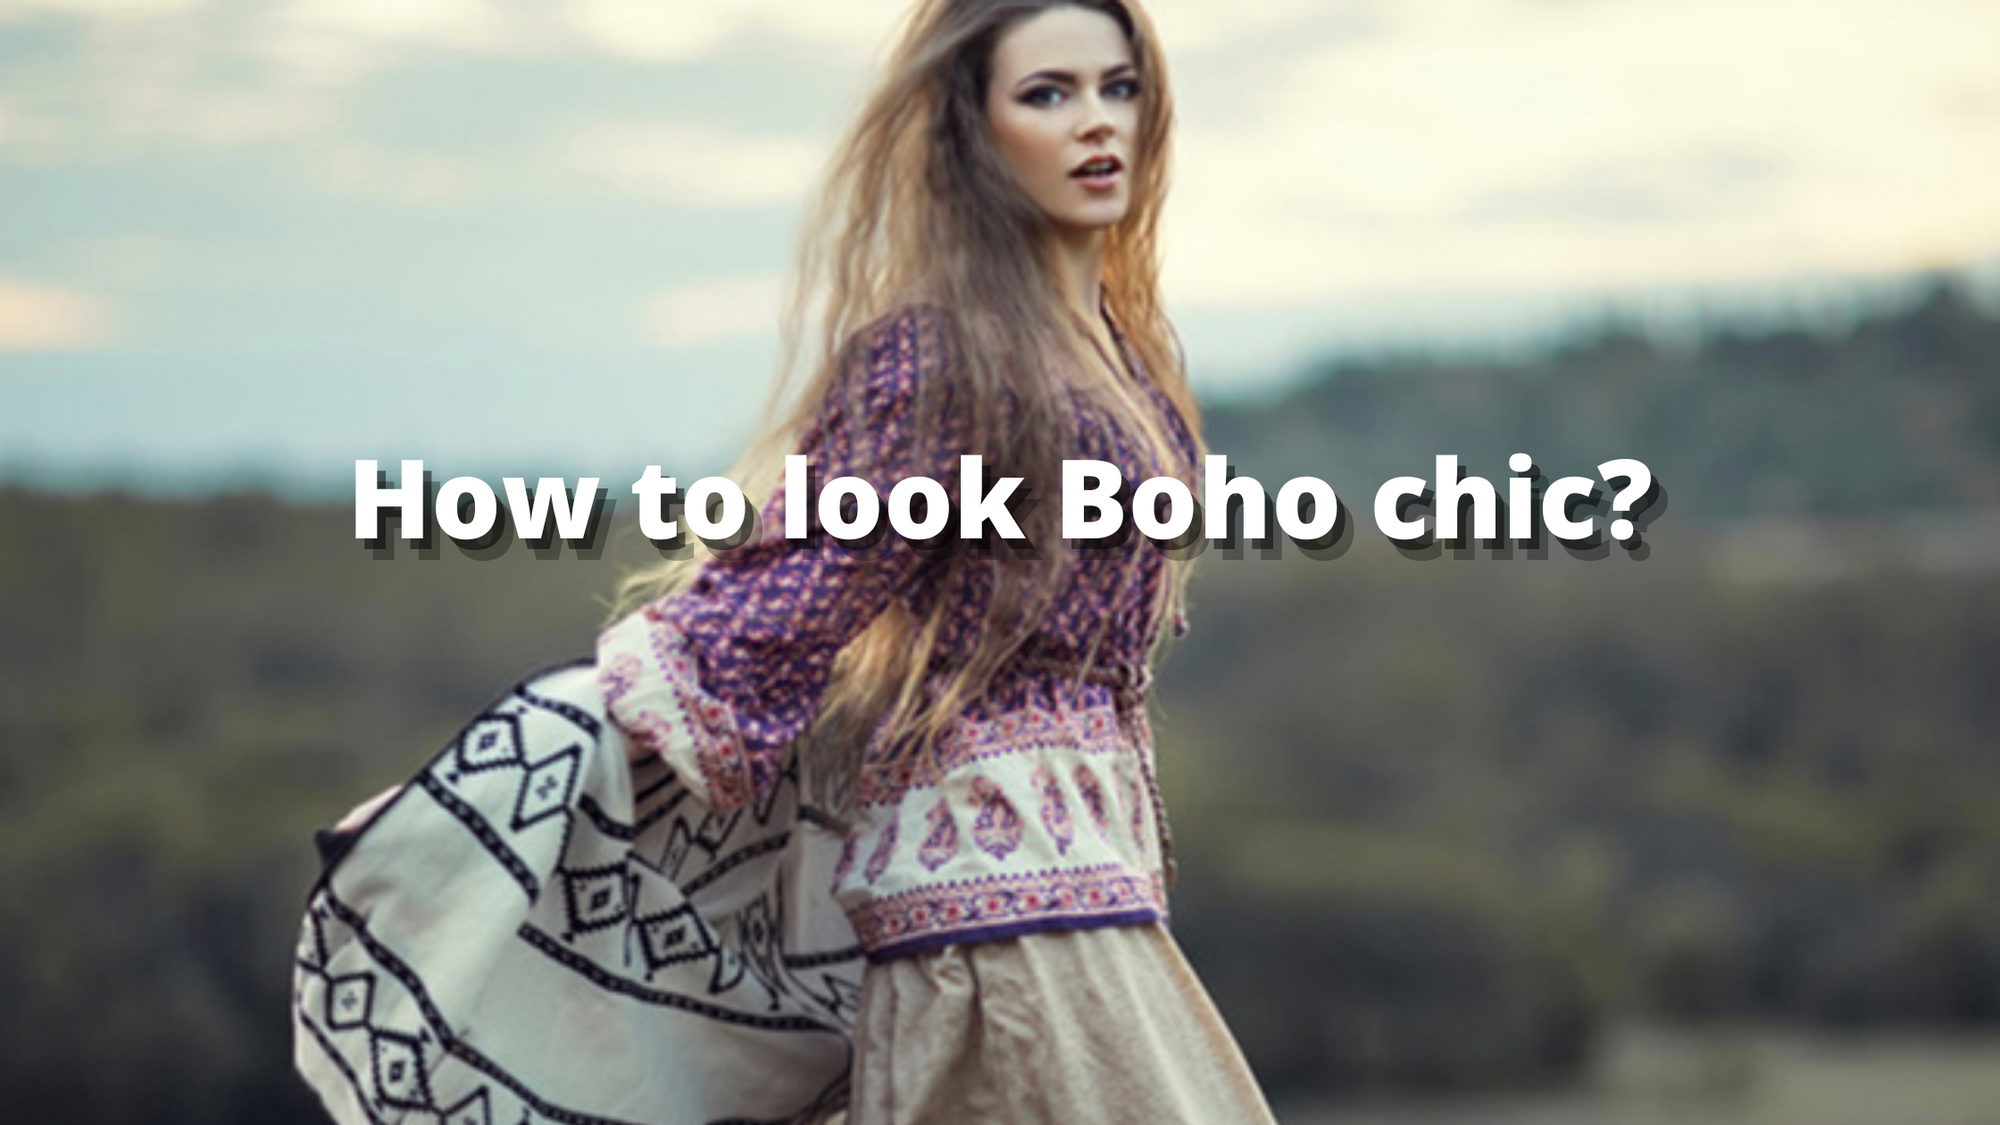 How to look boho chic?